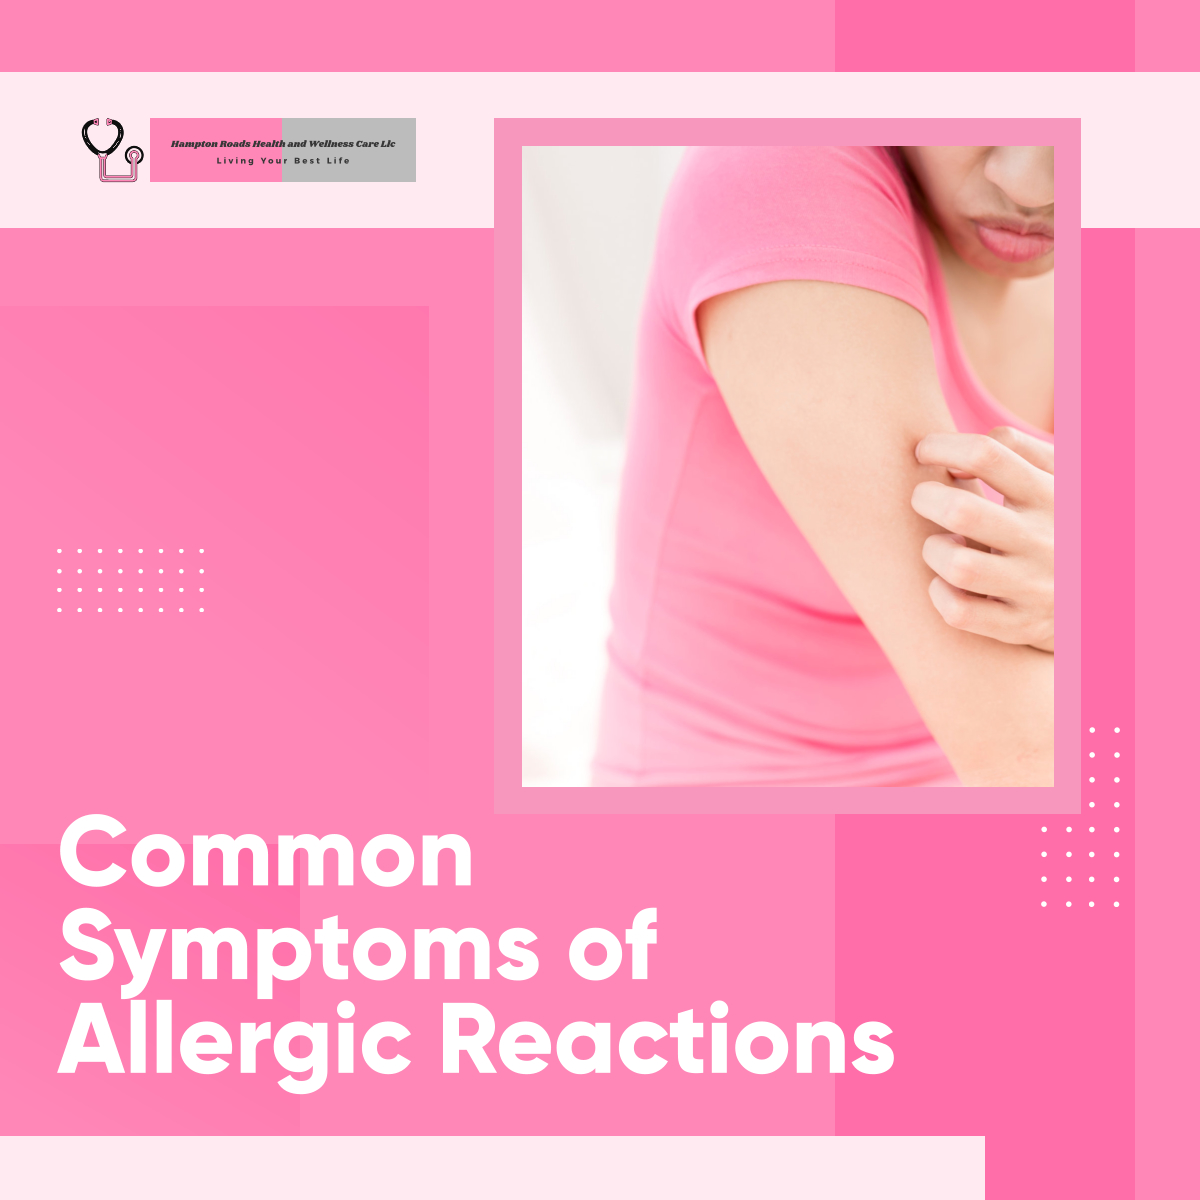 Allergic reactions occur when the body's immune system overreacts to a substance that it perceives as a threat, such as pollen, food, medications, or insect stings. 

Read more: facebook.com/HRHealthandWel…

#AllergicReactions #FamilyClinicServices #ChesapeakeVA